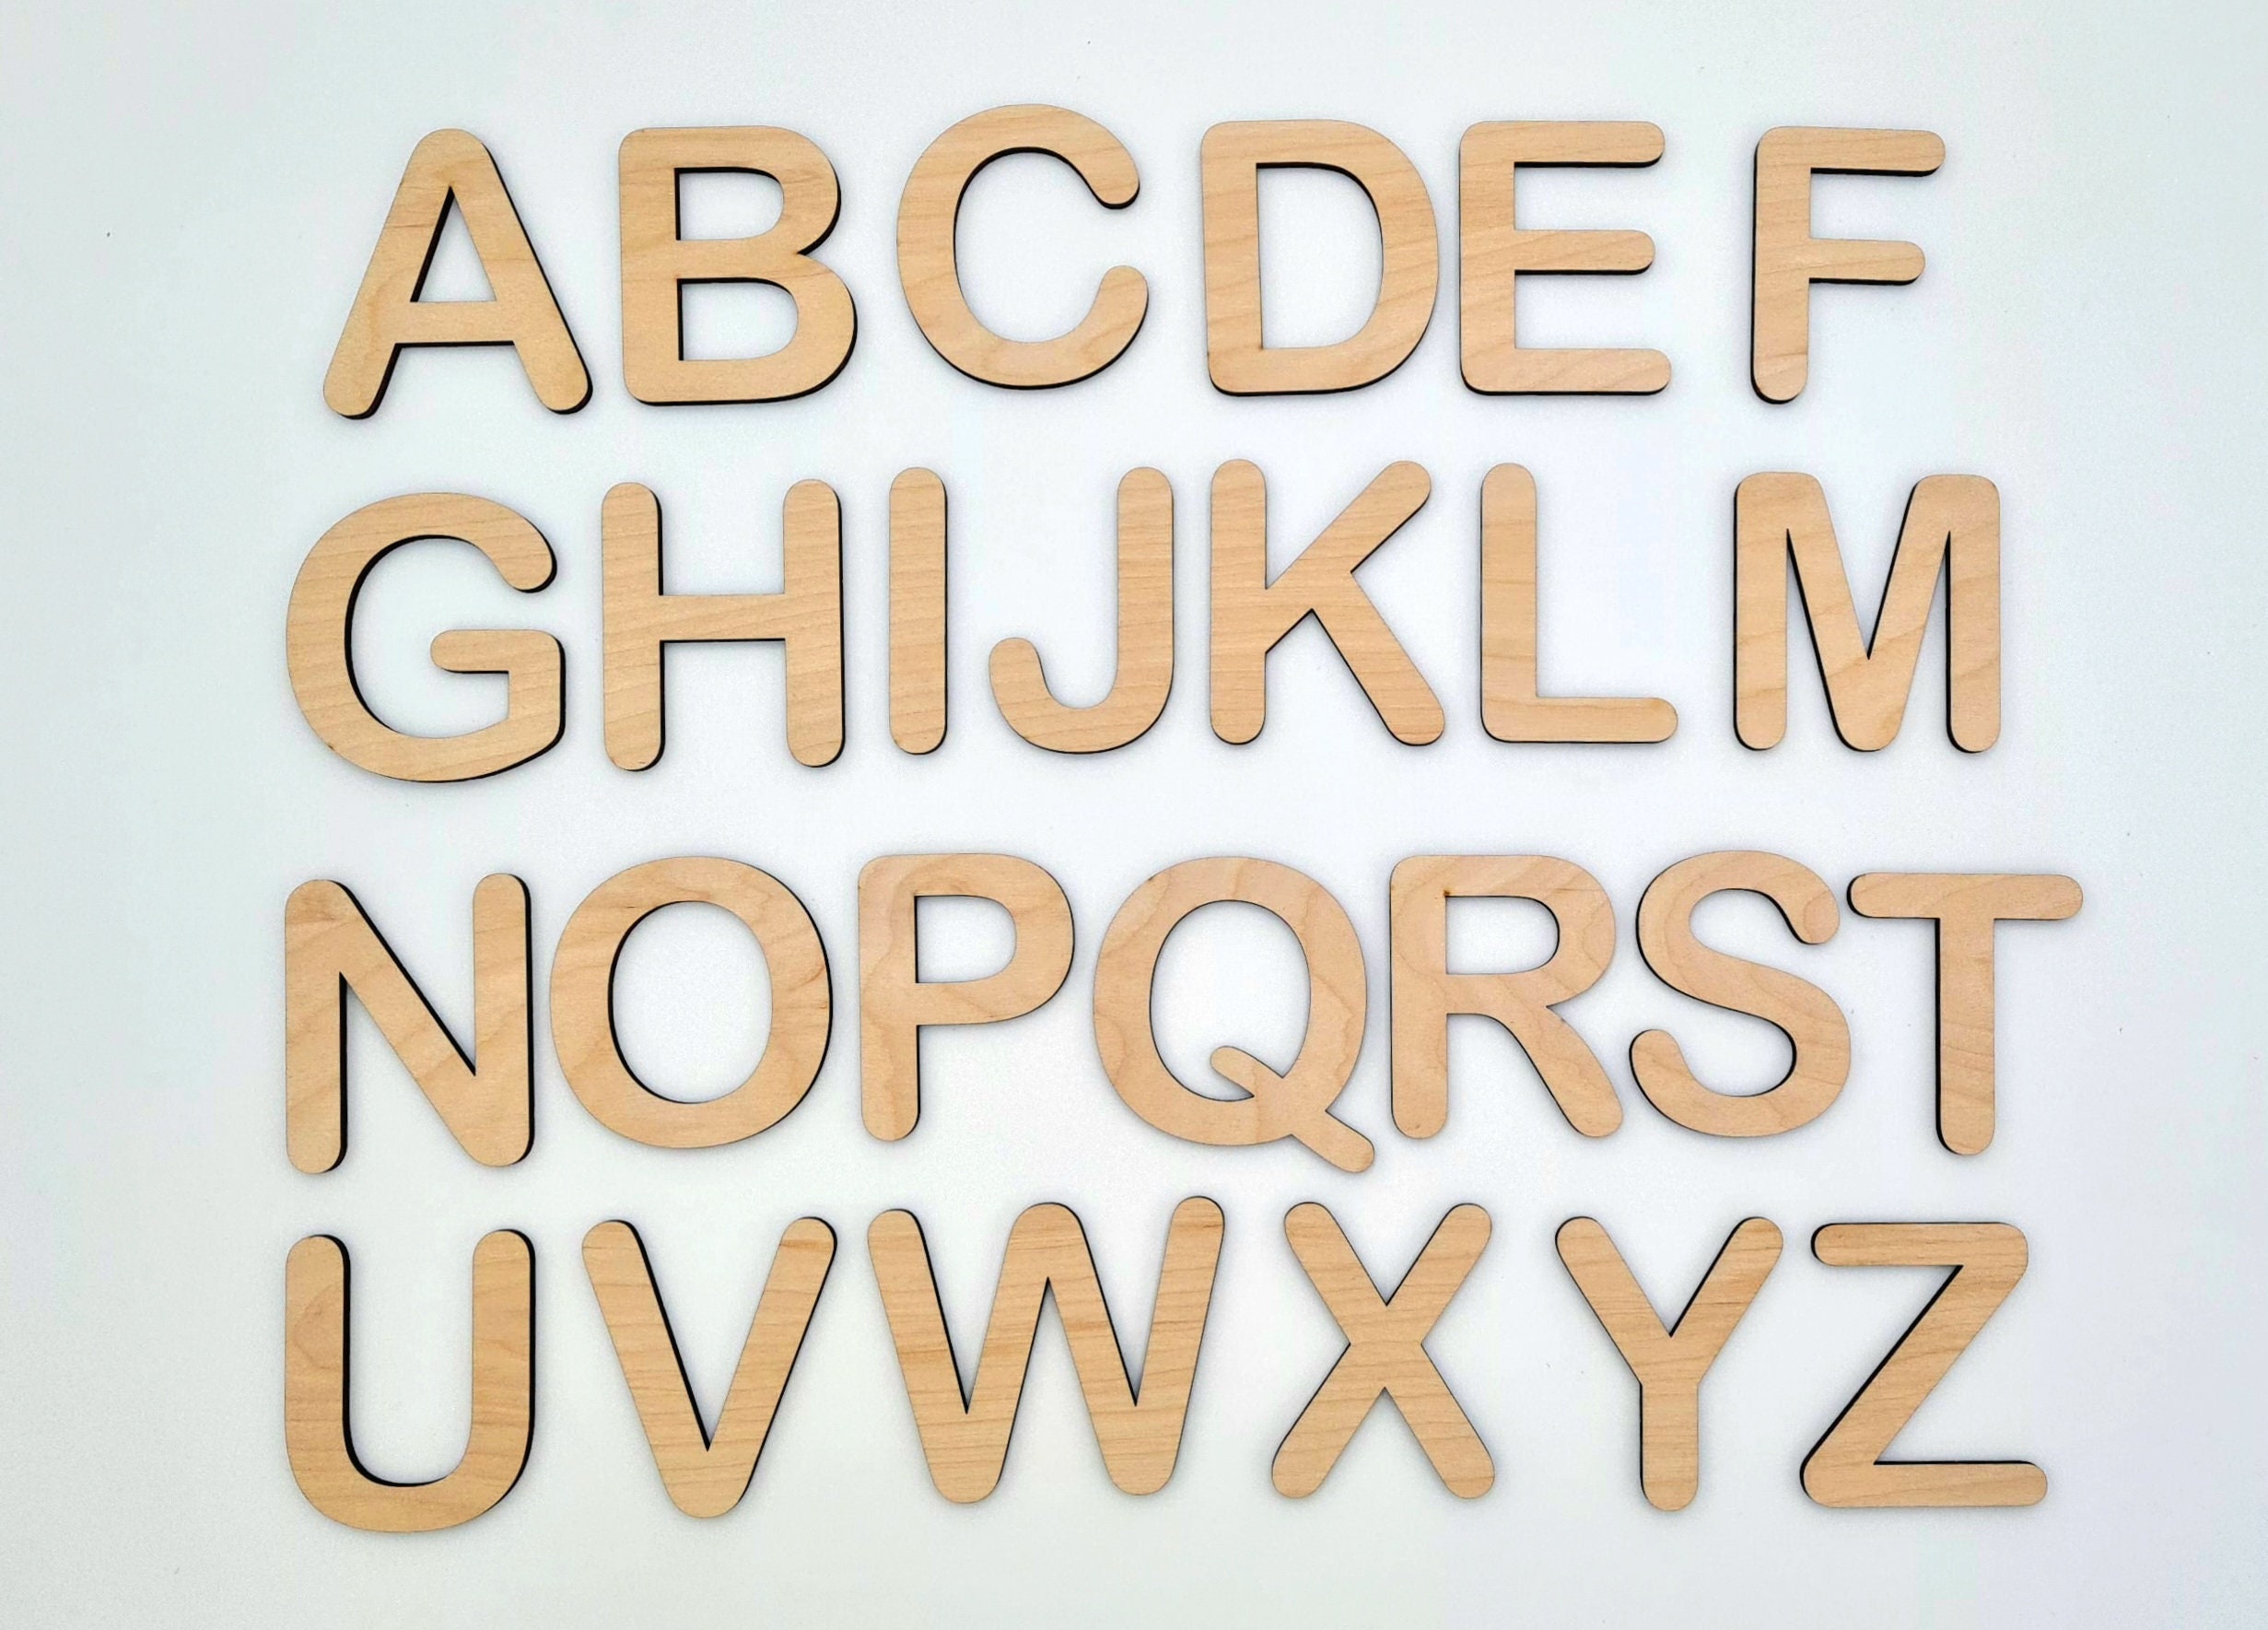 Incraftables Wooden Letters for Crafts (2 inch Big). A-Z Alphabet